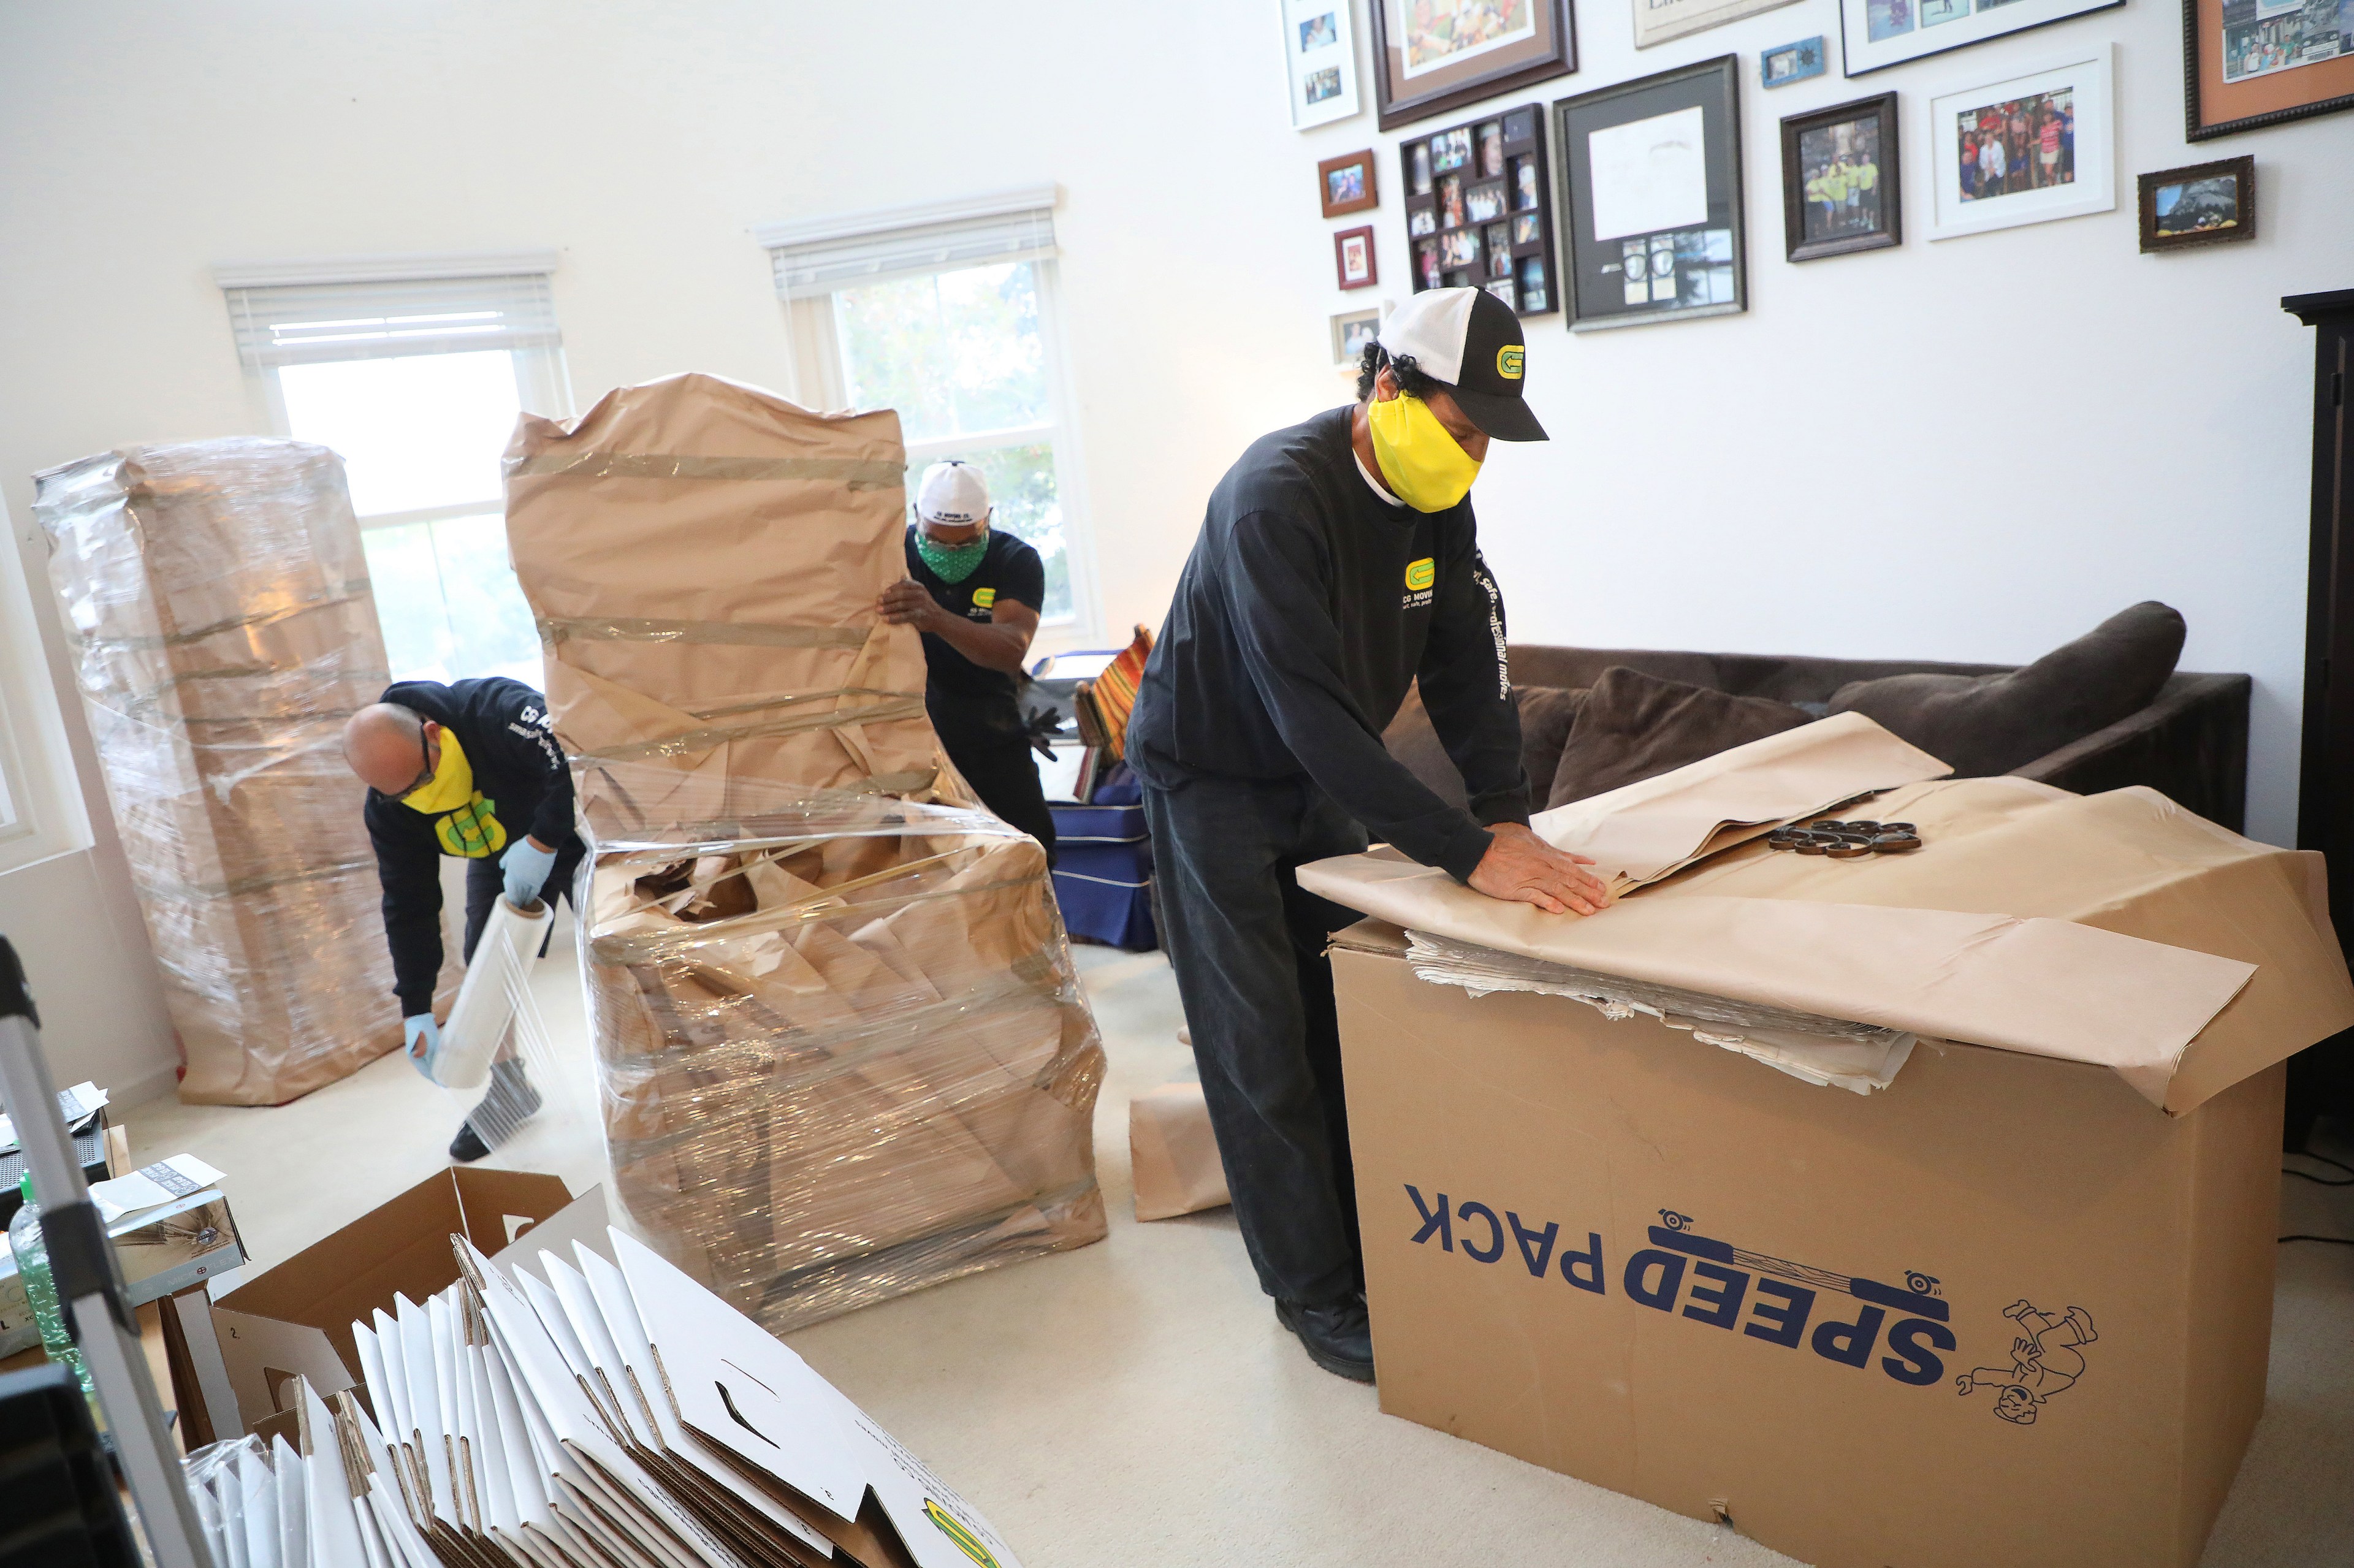 Three movers are packing/unpacking items in a room with framed photos on the wall.